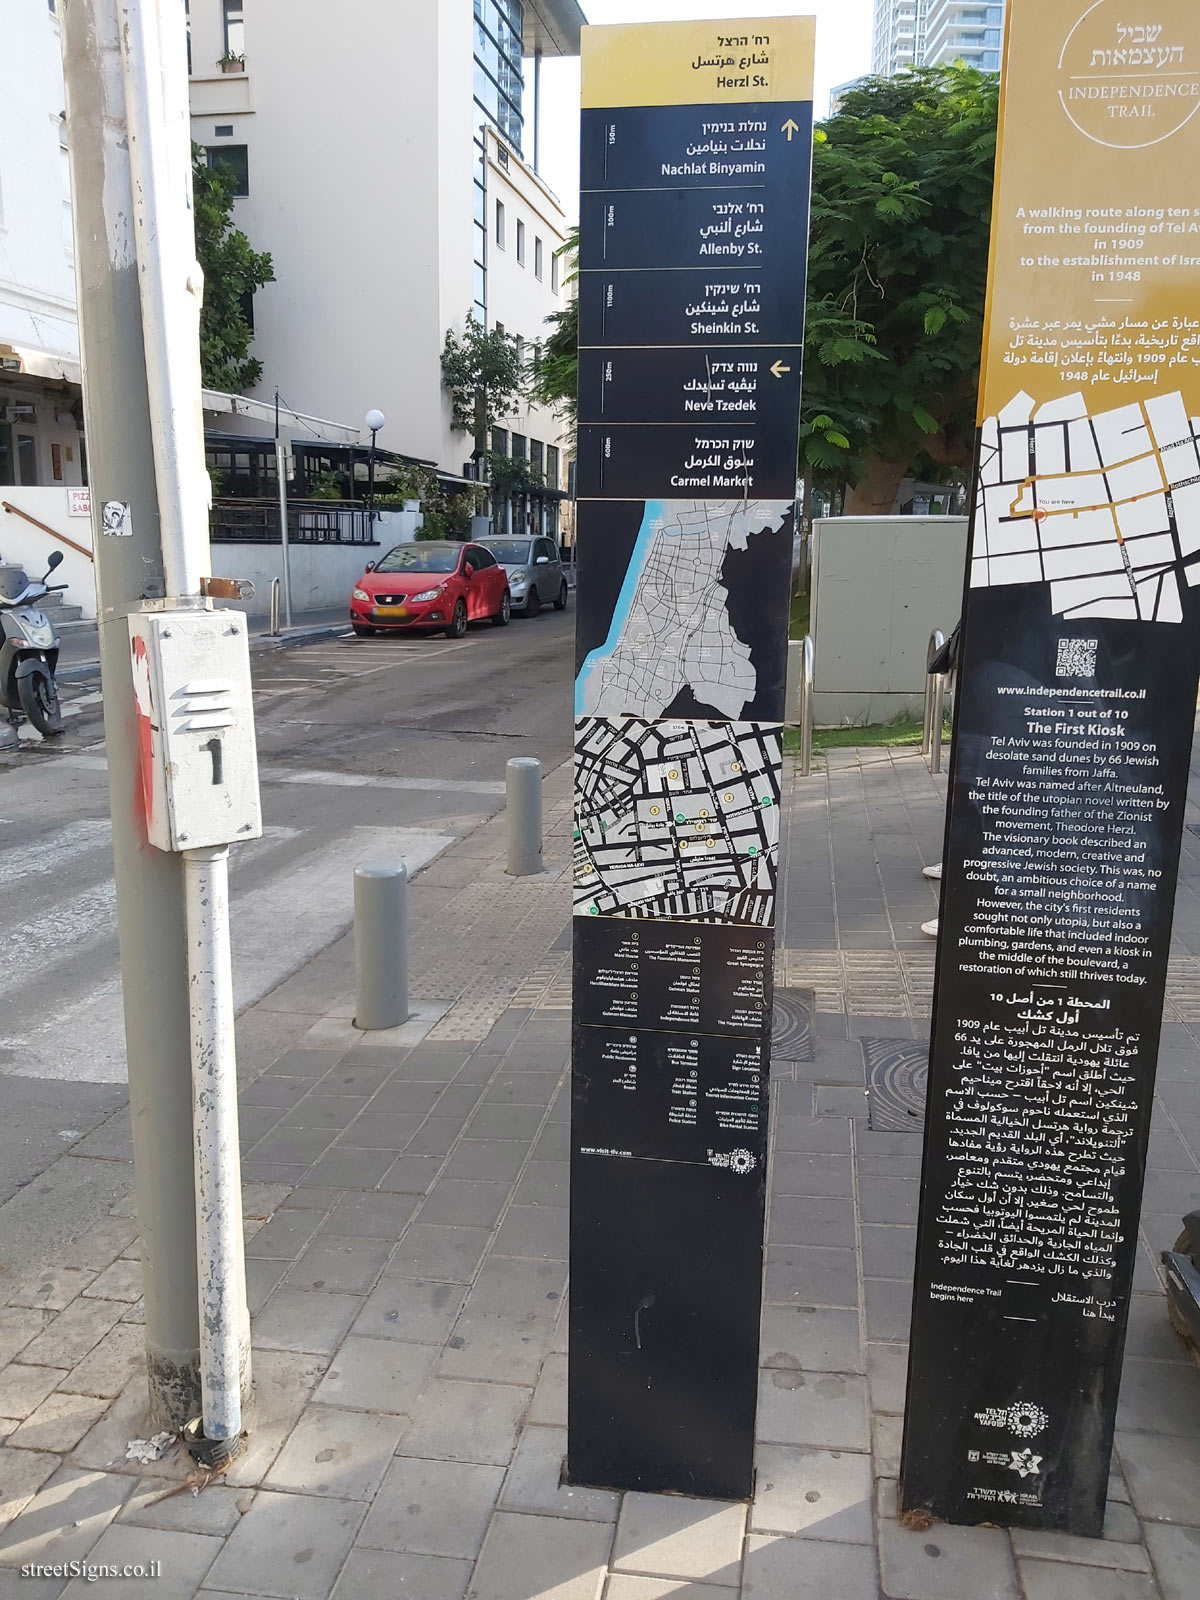 Tel Aviv - Herzl Street (About Rothschild Boulevard) (the other side of the sign)